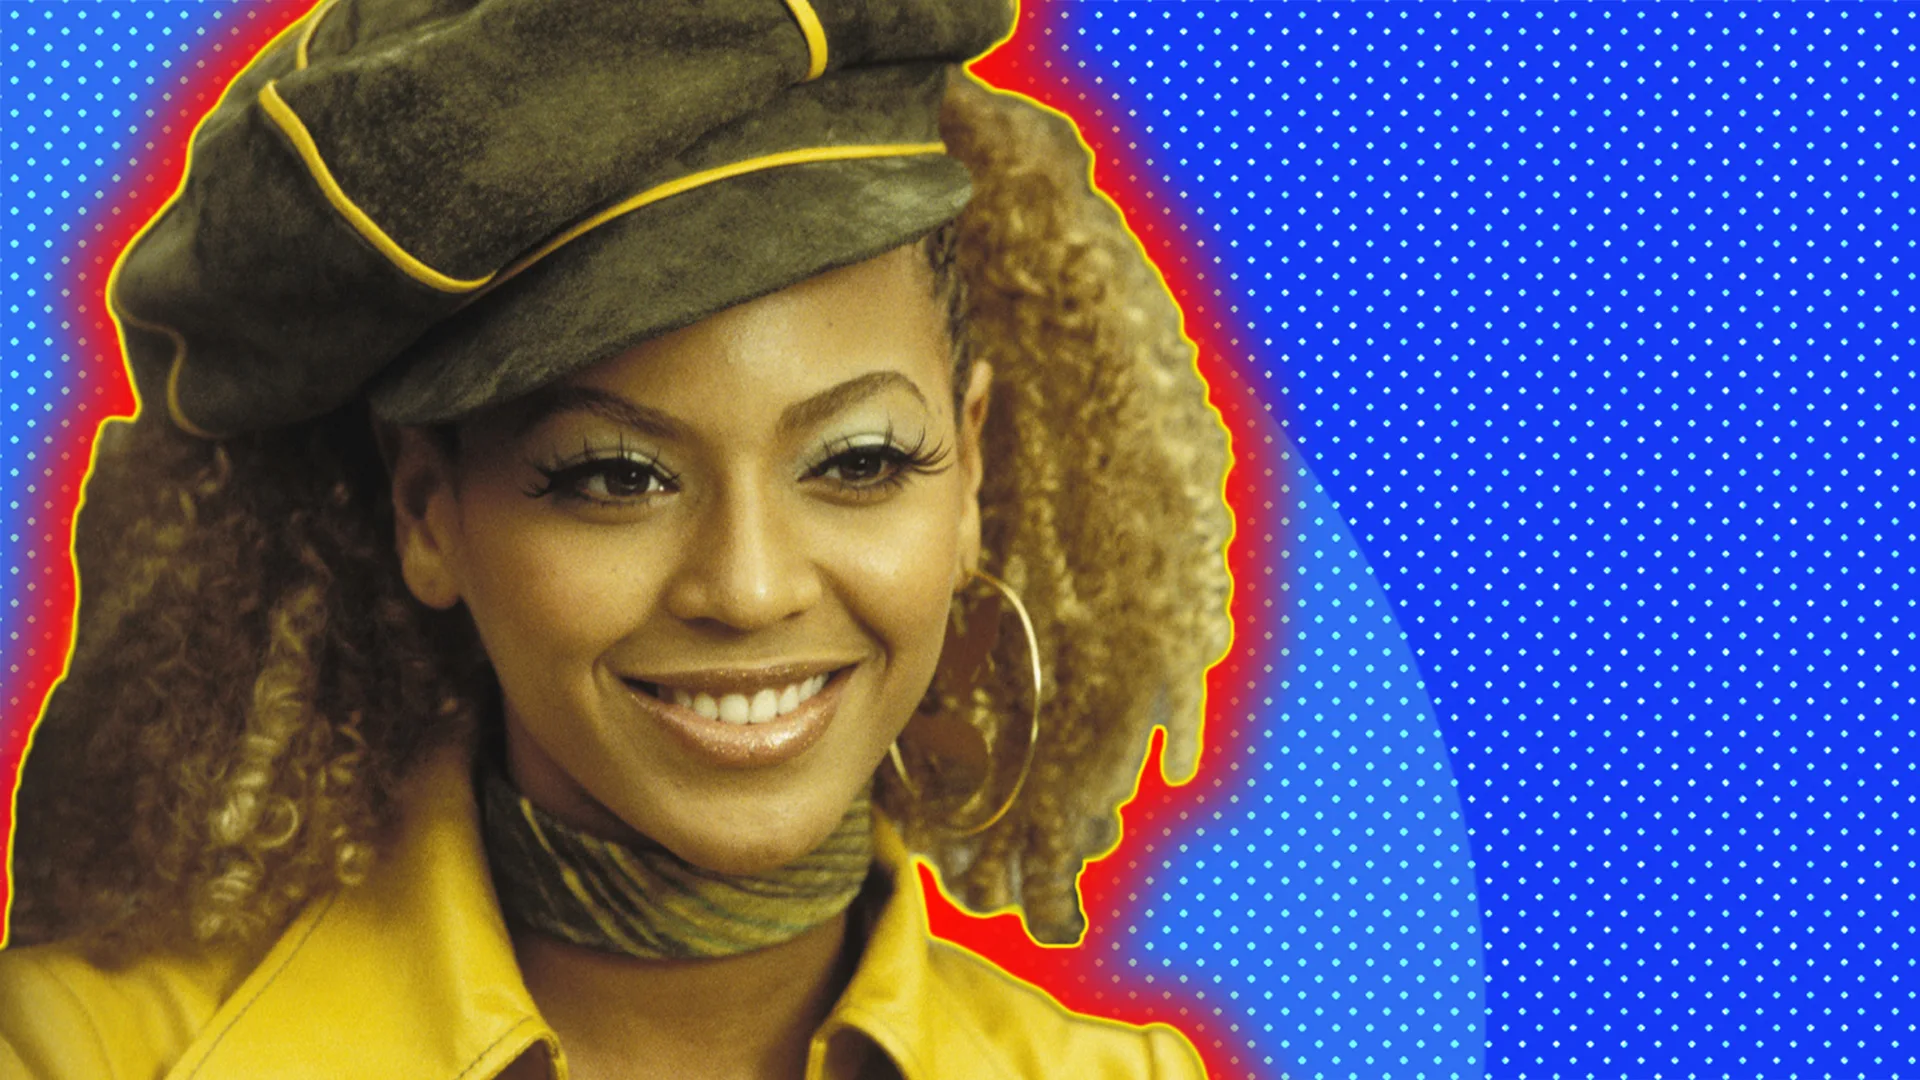 Beyonce smiling and wearing a 70s style hat and yellow jacket with a blue textured background and a red outline halo effect